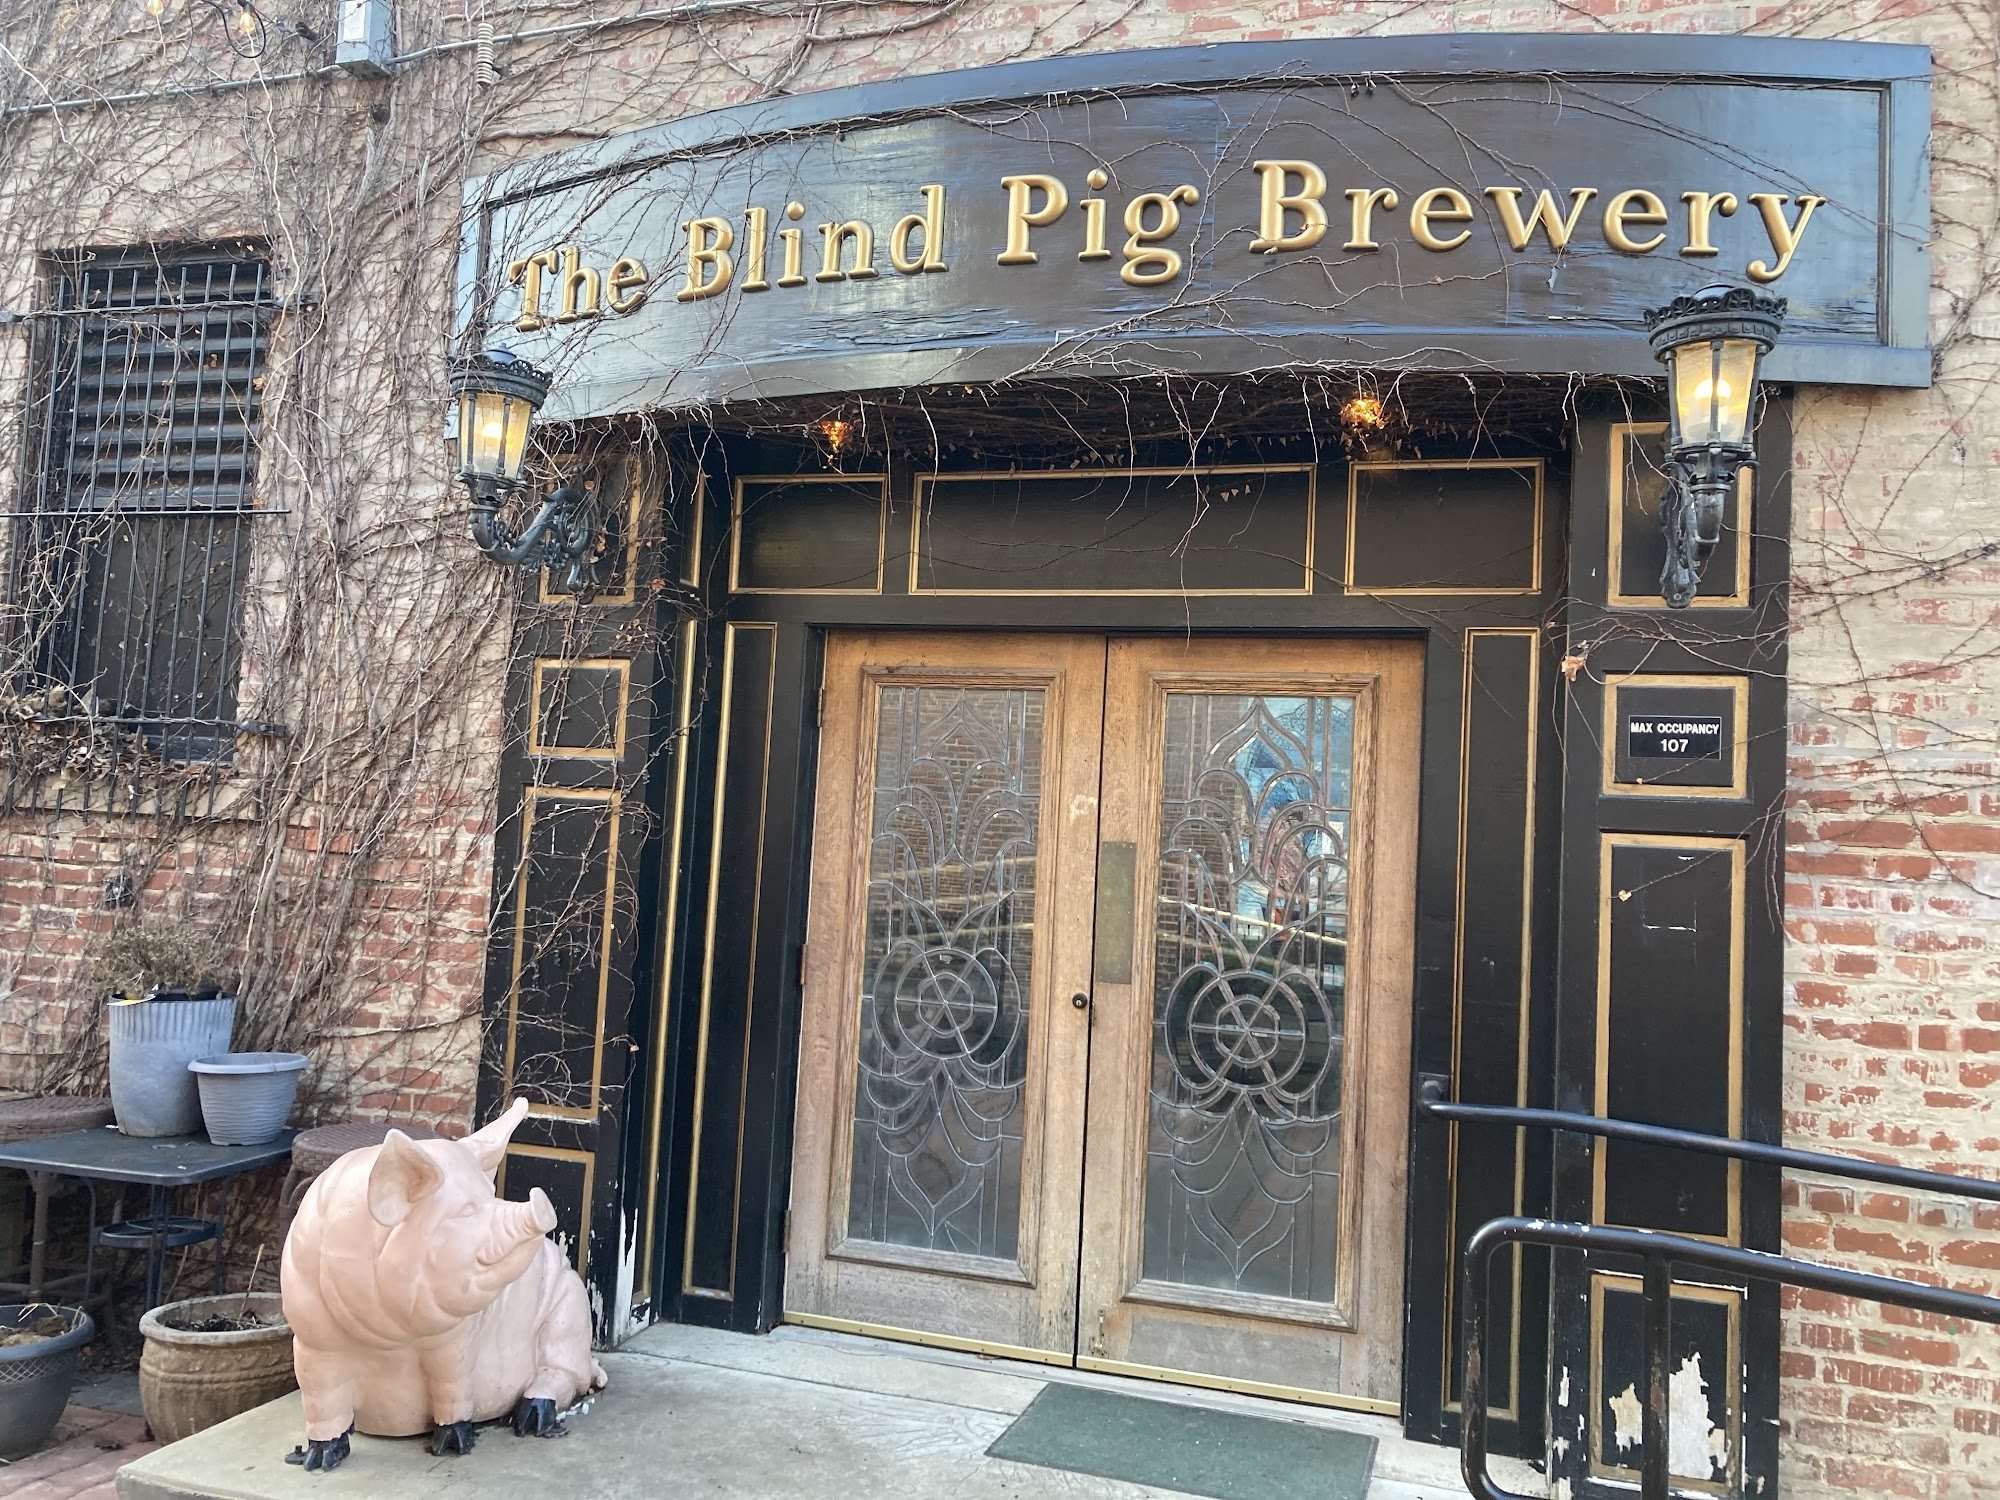 The Blind Pig Brewery